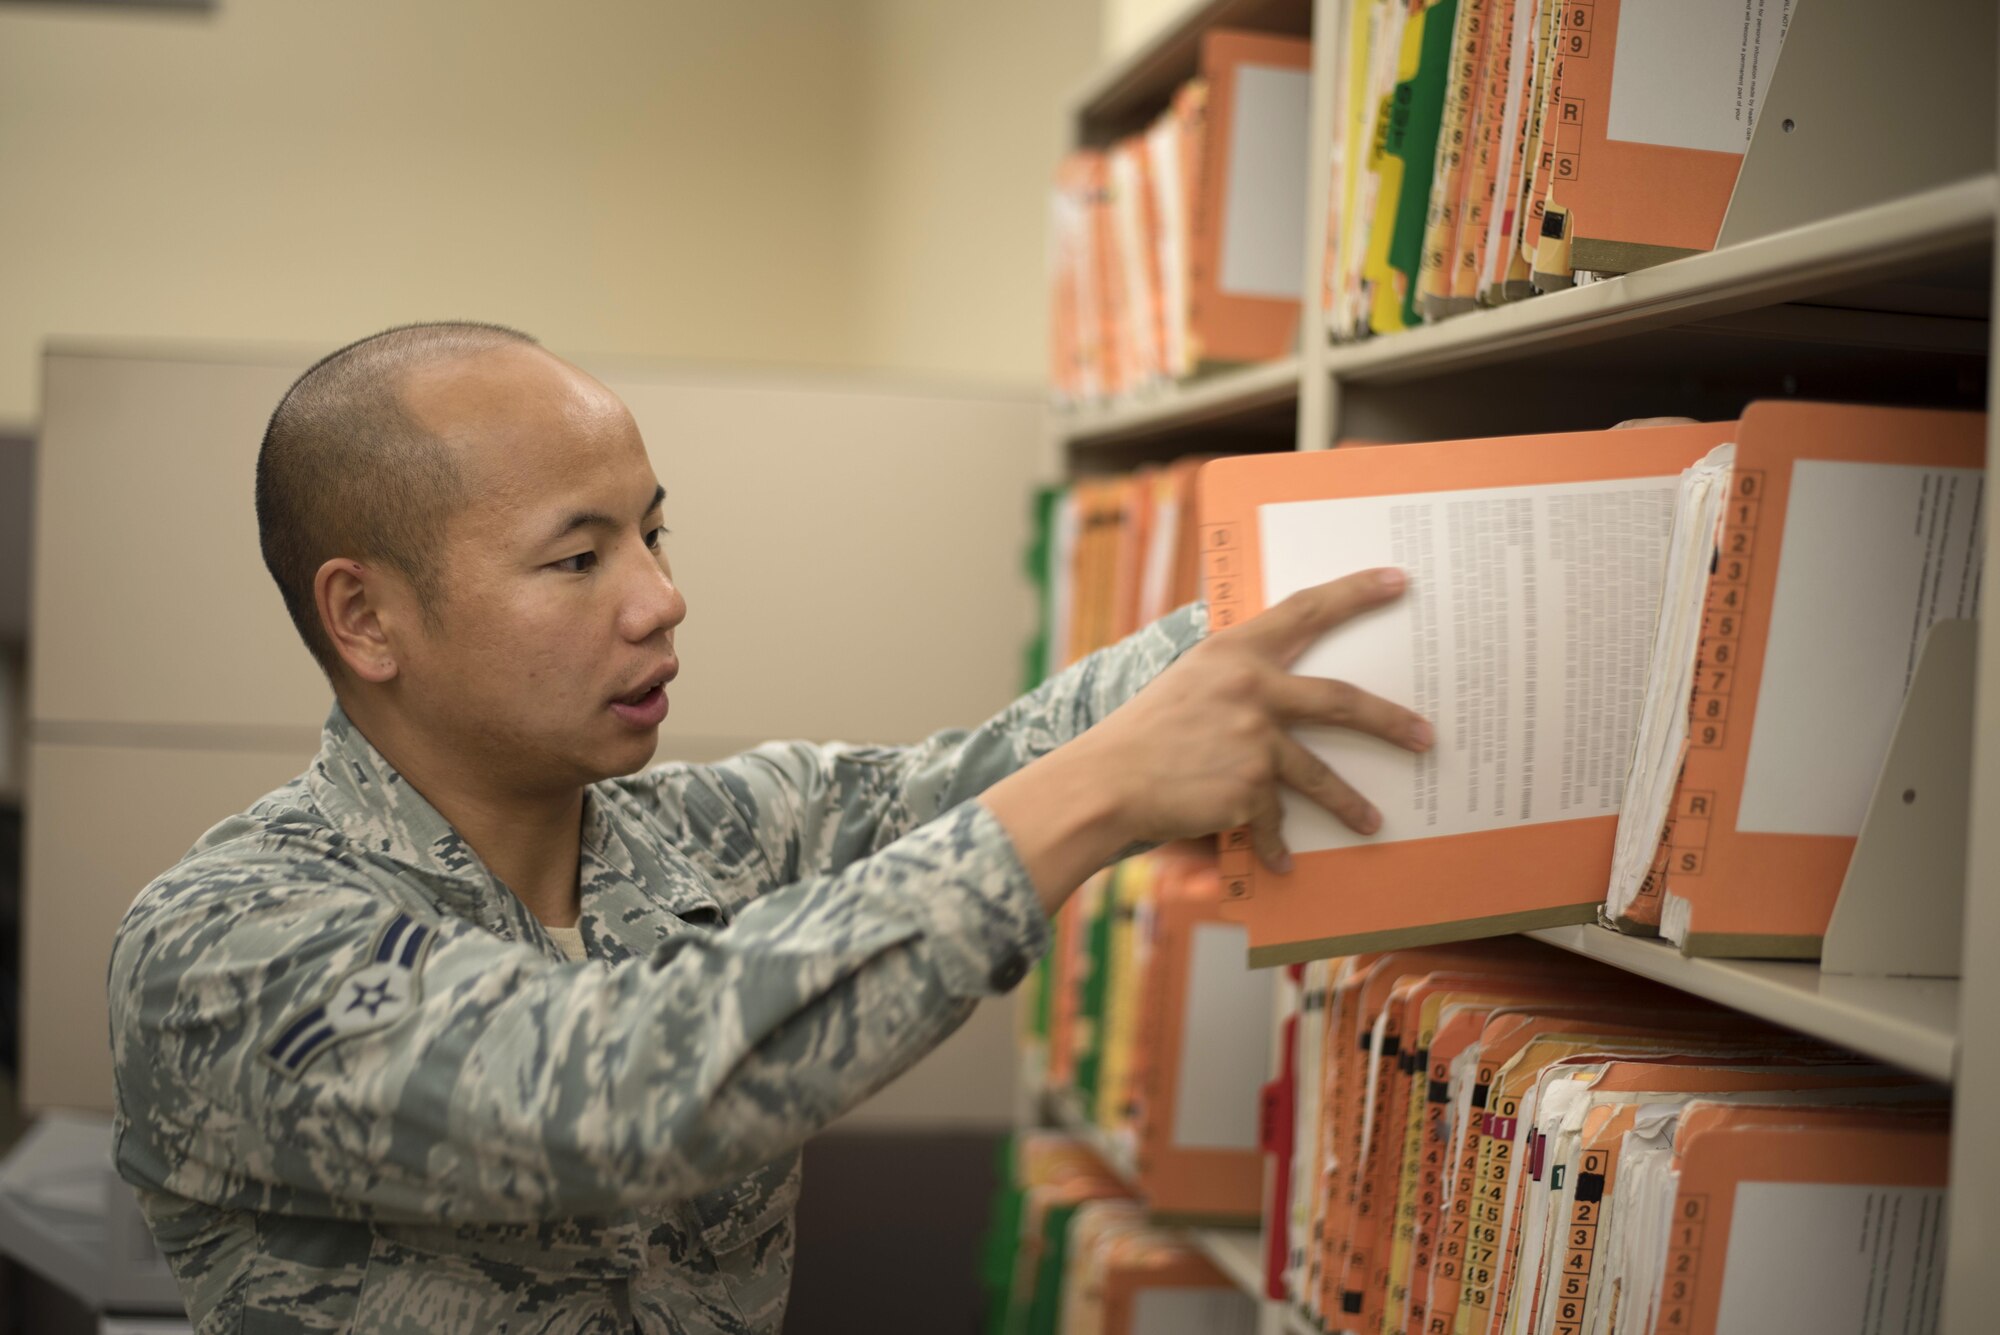 U.S. Air Force Airman 1st Class Seng Thao, a medical records technician assigned to the 6th Medical Support Squadron, puts a file back onto a shelf, Aug. 31, 2017, at MacDill Air Force Base, Fla.